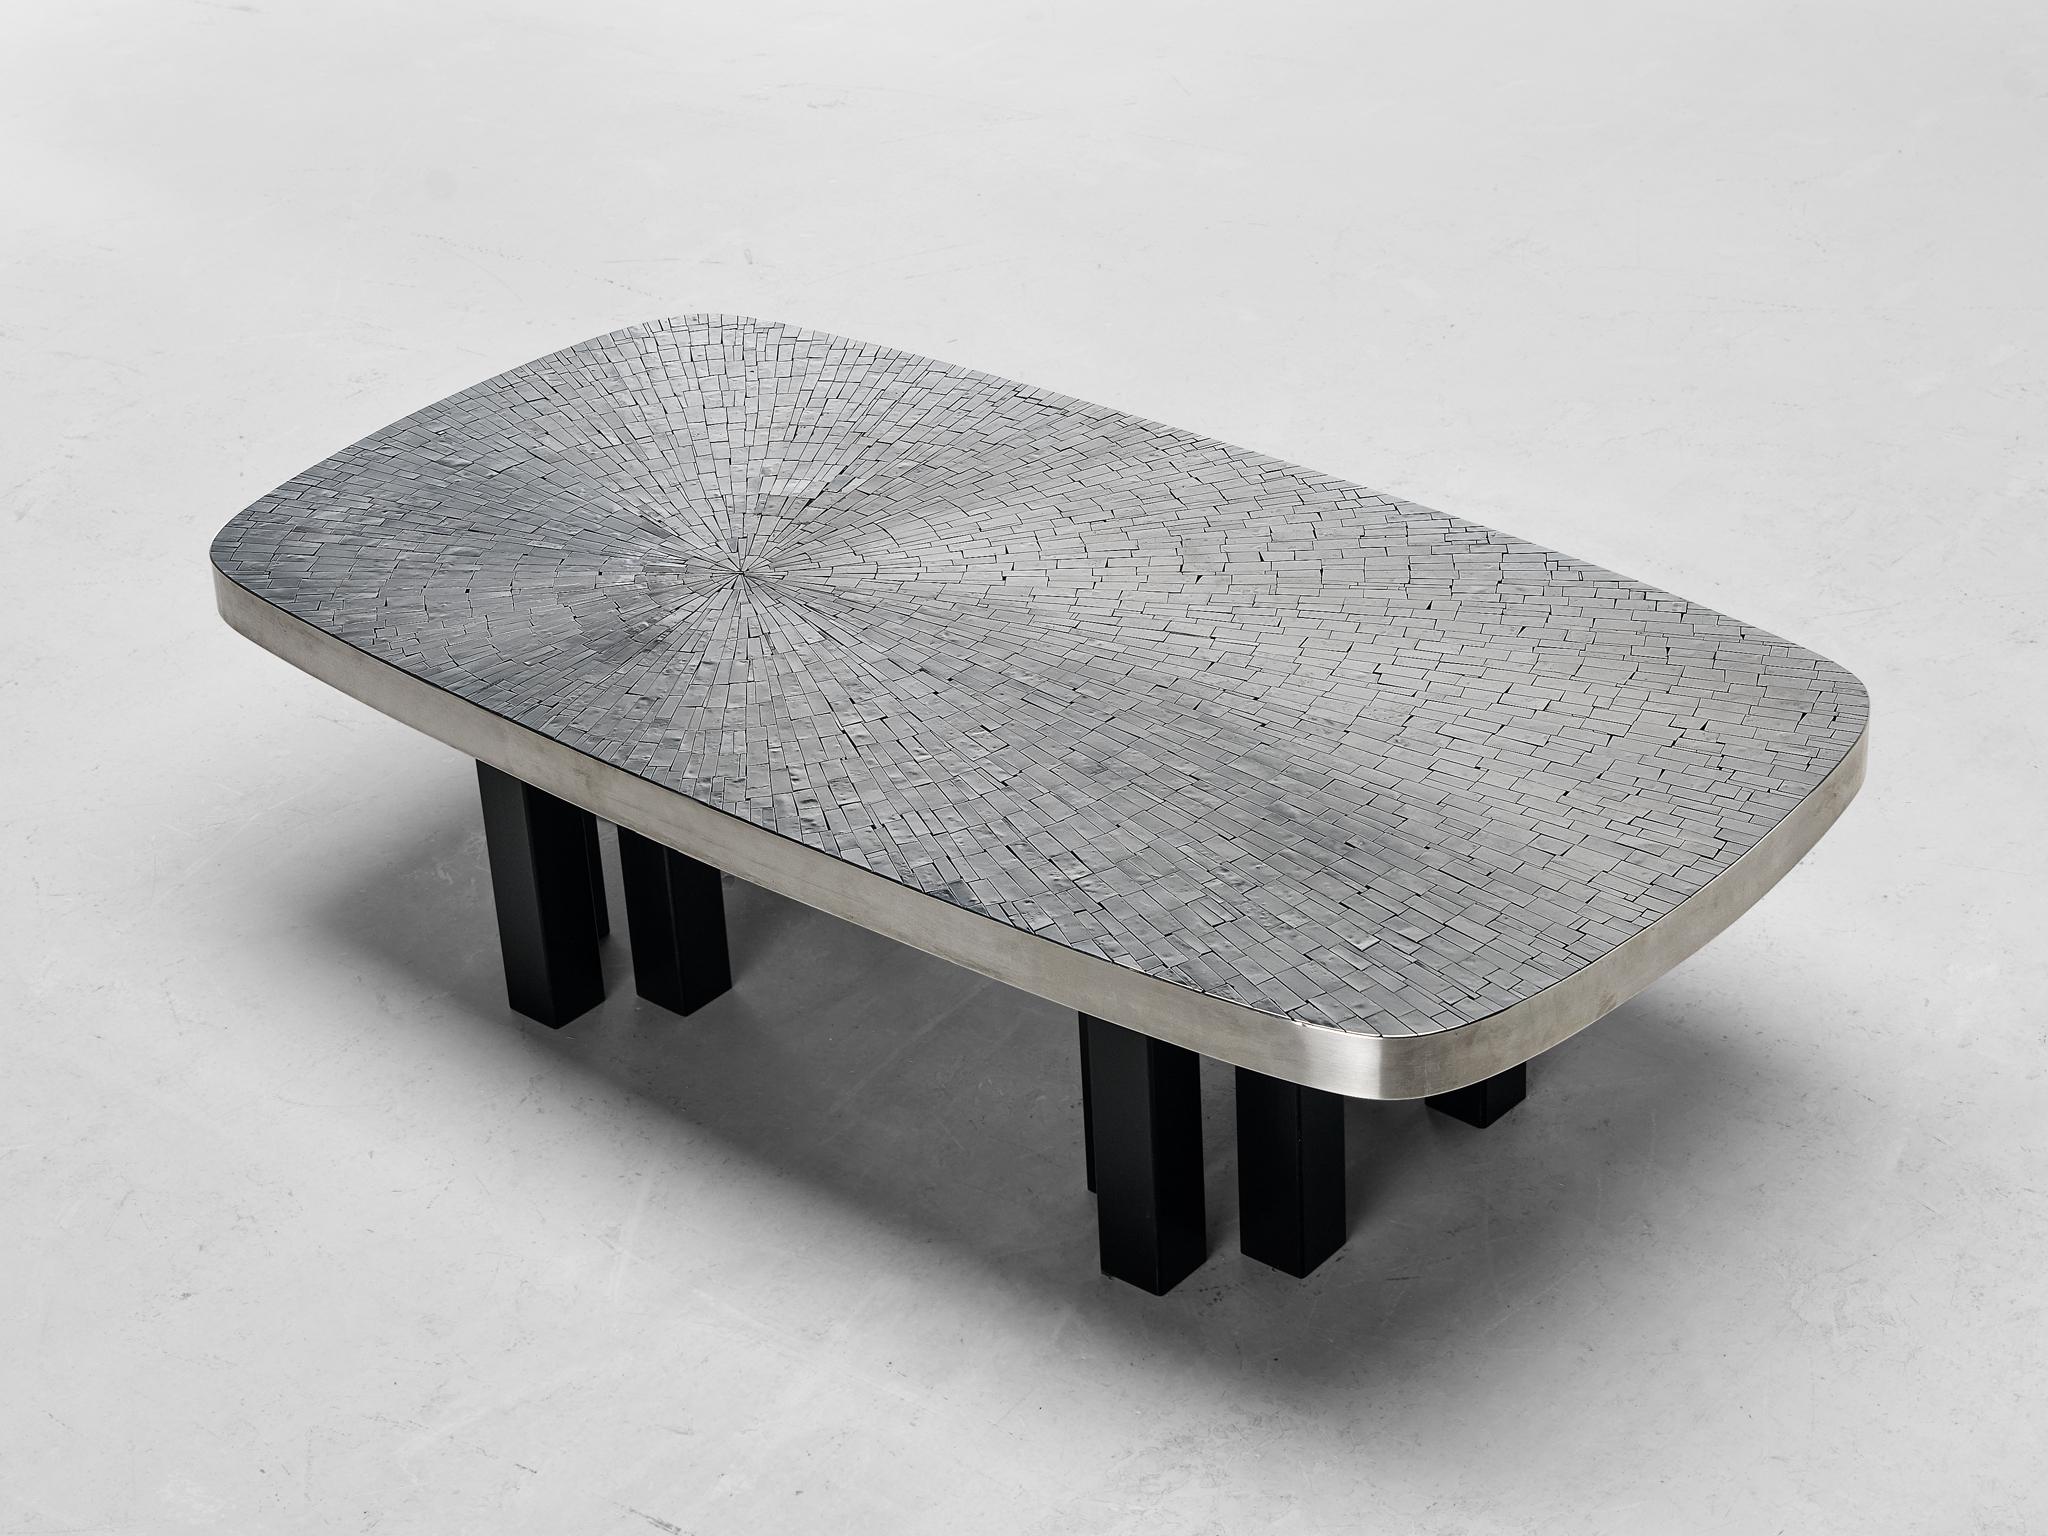 Jean Claude Dresse, coffee table, stainless steel, lacquered steel, Belgium, circa 1975

Enchanting coffee table designed by Belgian artist Jean Claude Dresse in the mid-70s. This rectangular table with rounded contours is easily recognizable as a